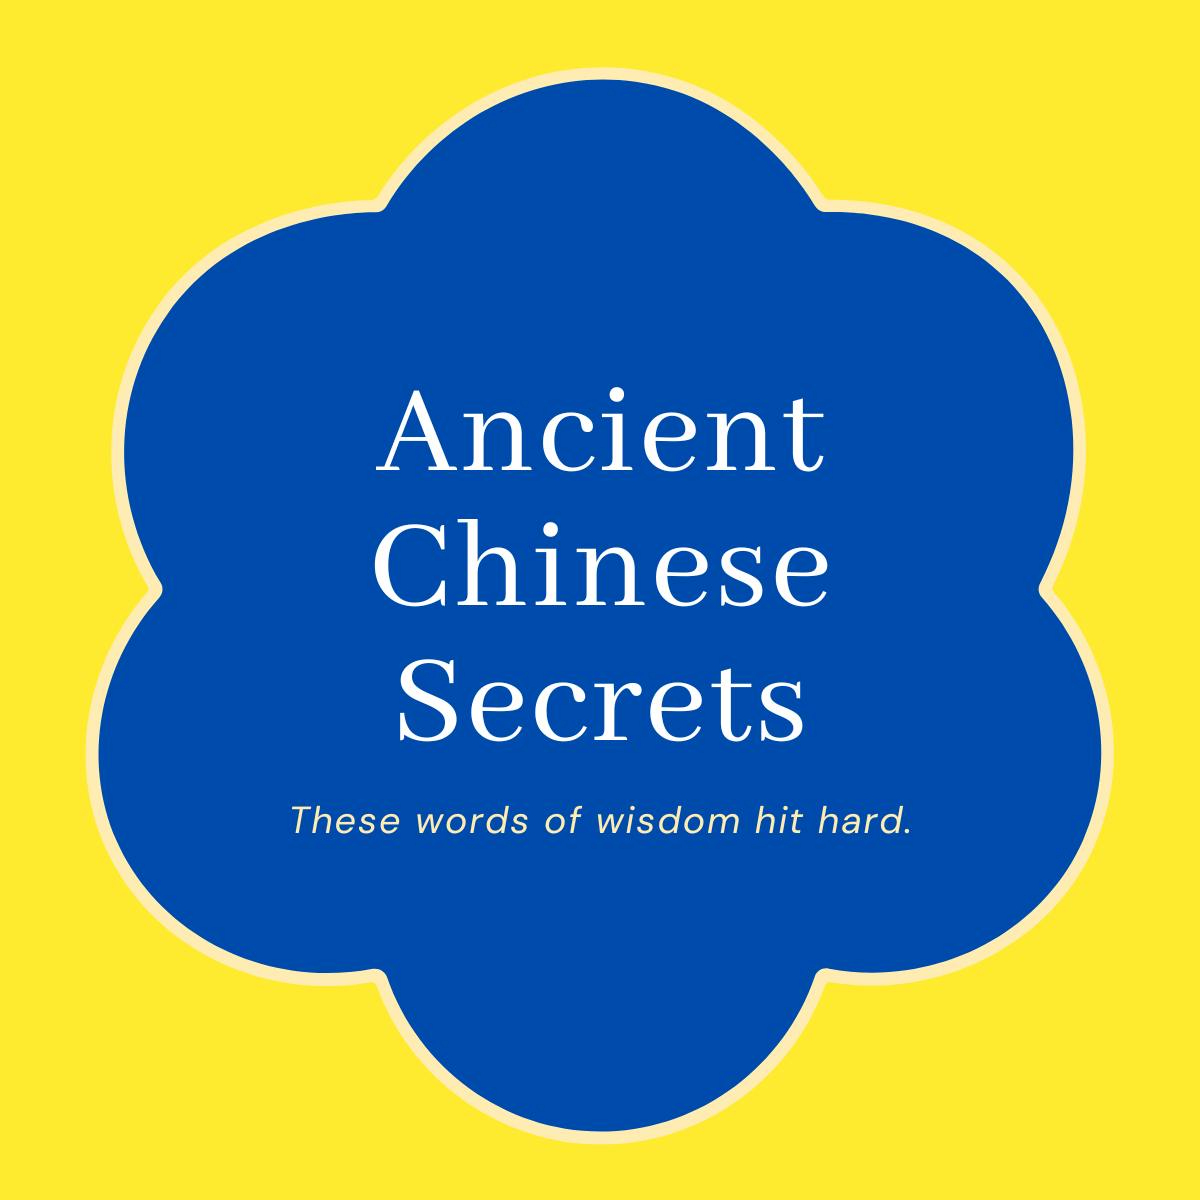 Ancient Chinese Secrets